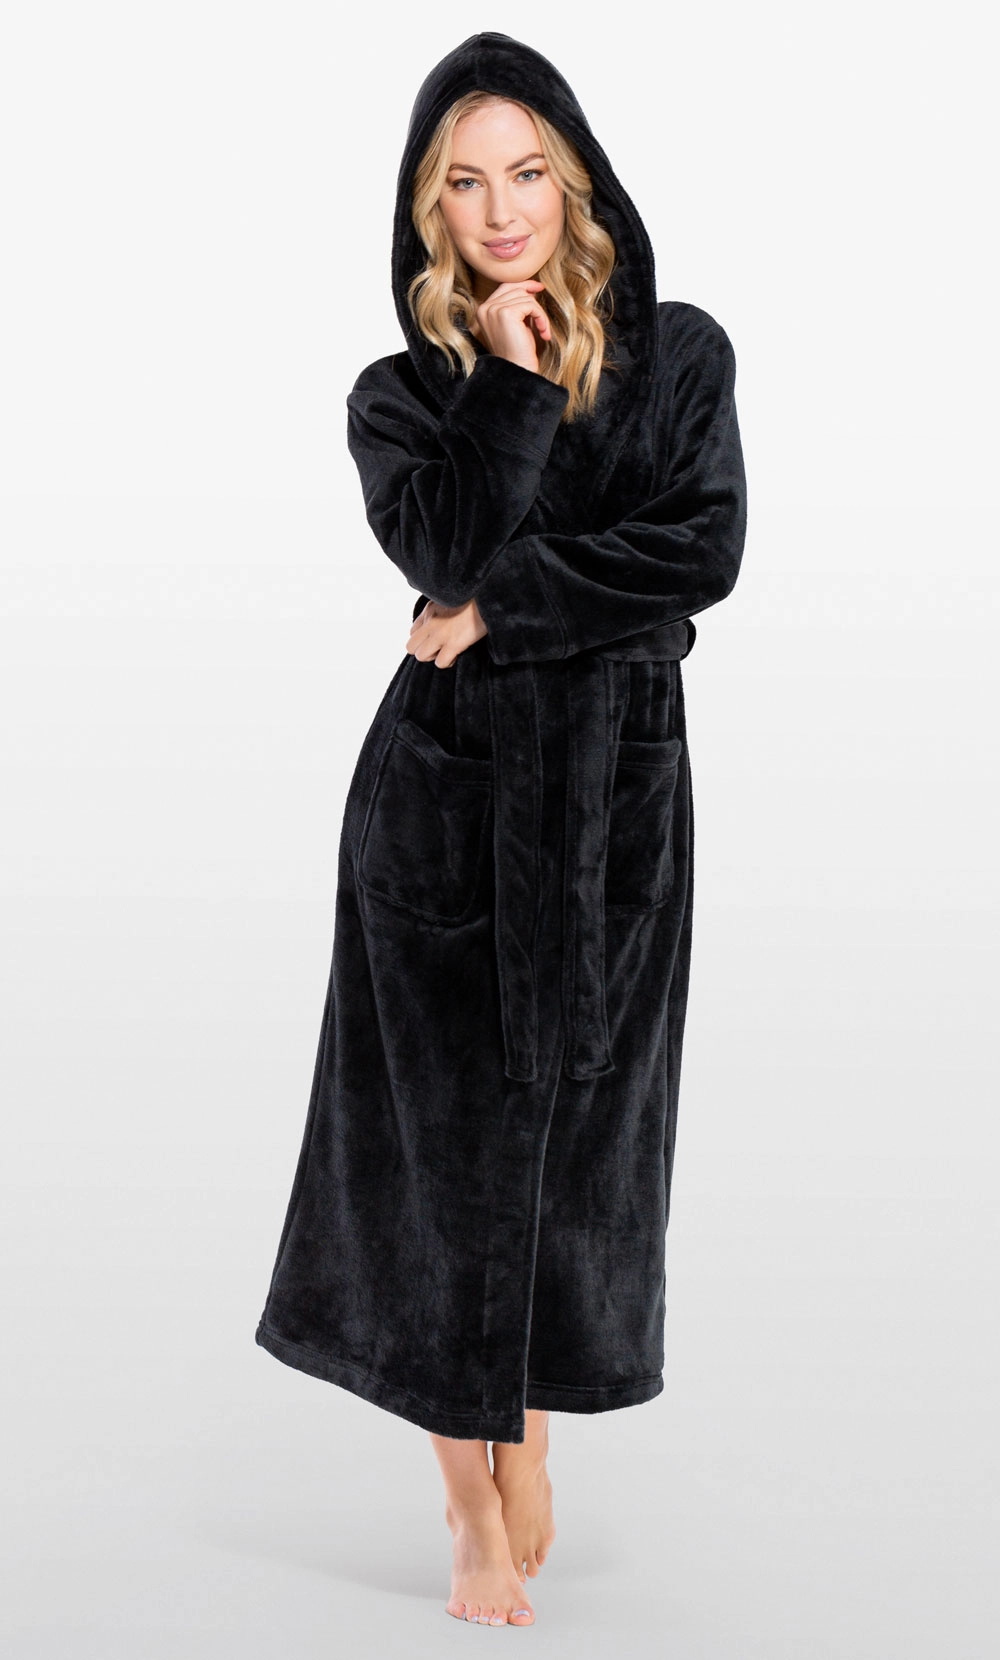 Soft Plush Fleece Women's Robe for Mothers, Wives, Daughters, and